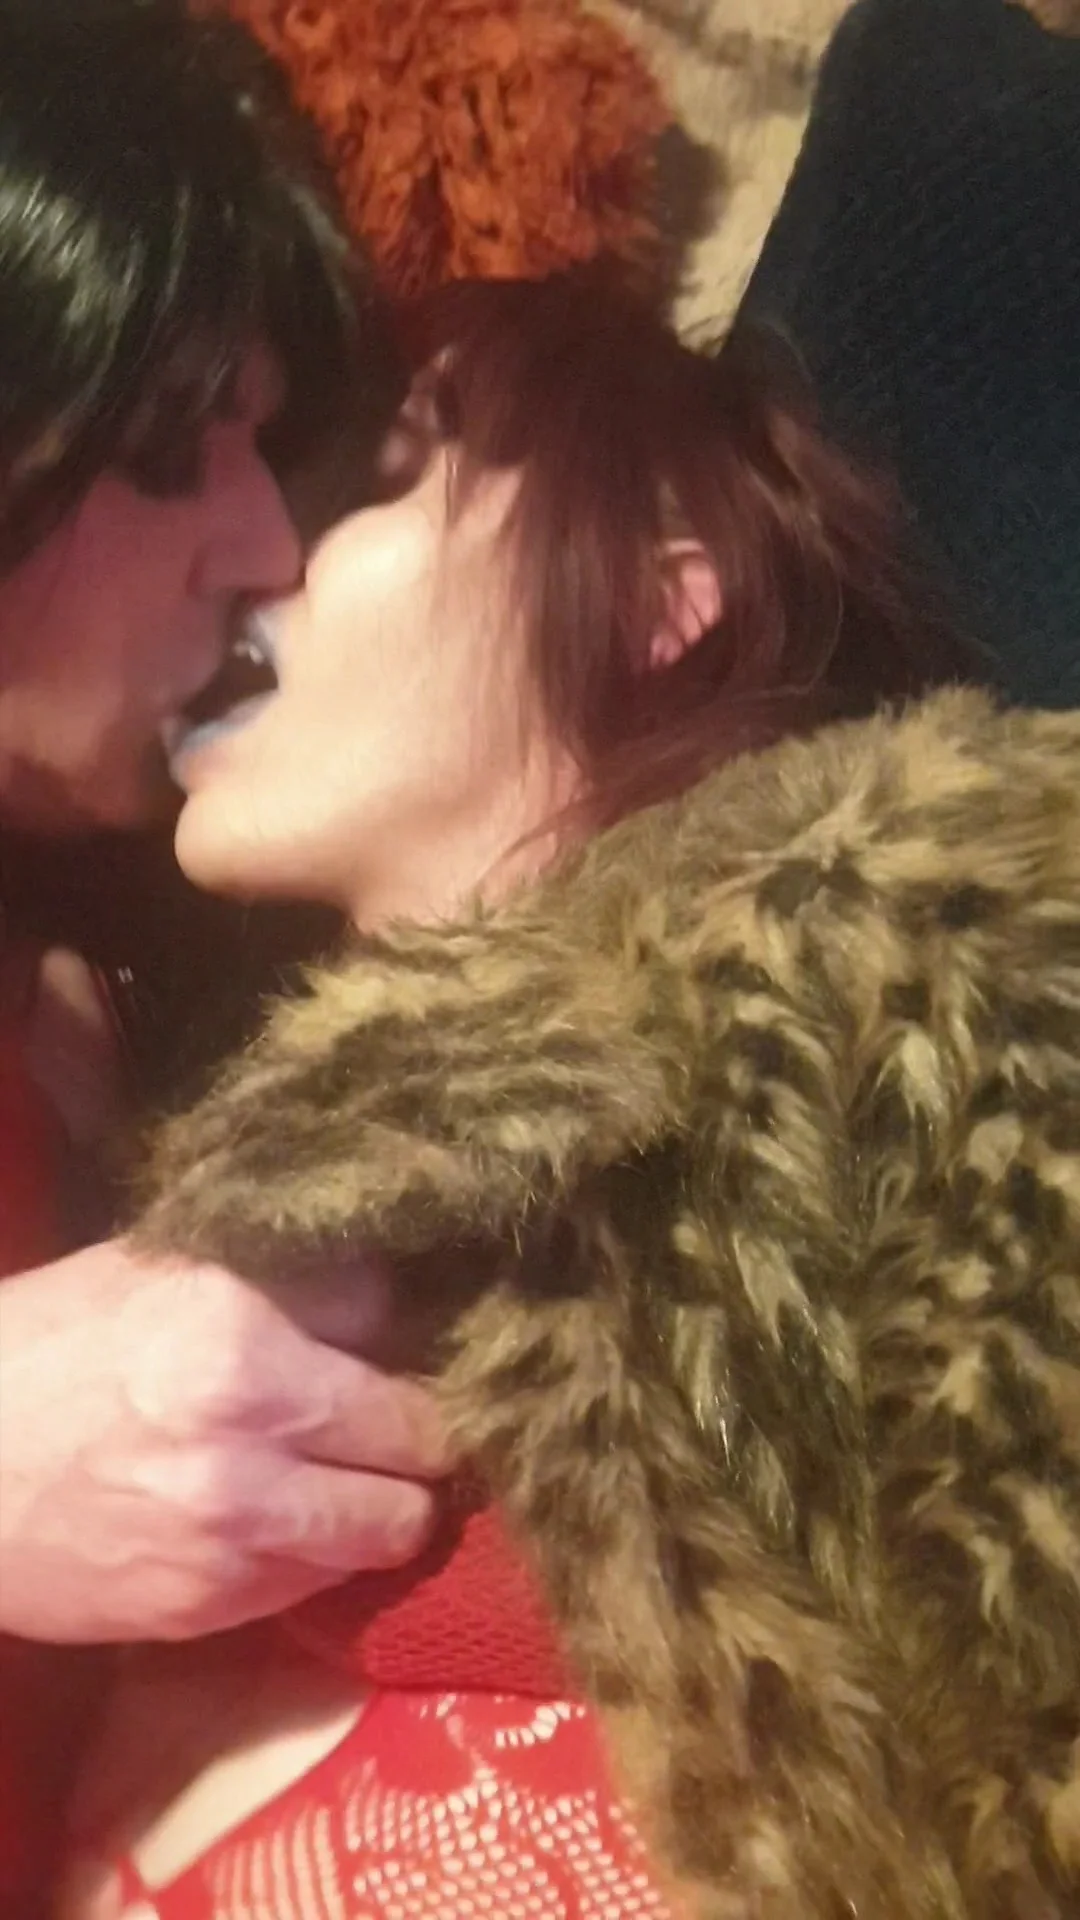 Shemales Making Out - SheMales: Sissy makeout kissing - ThisVid.com